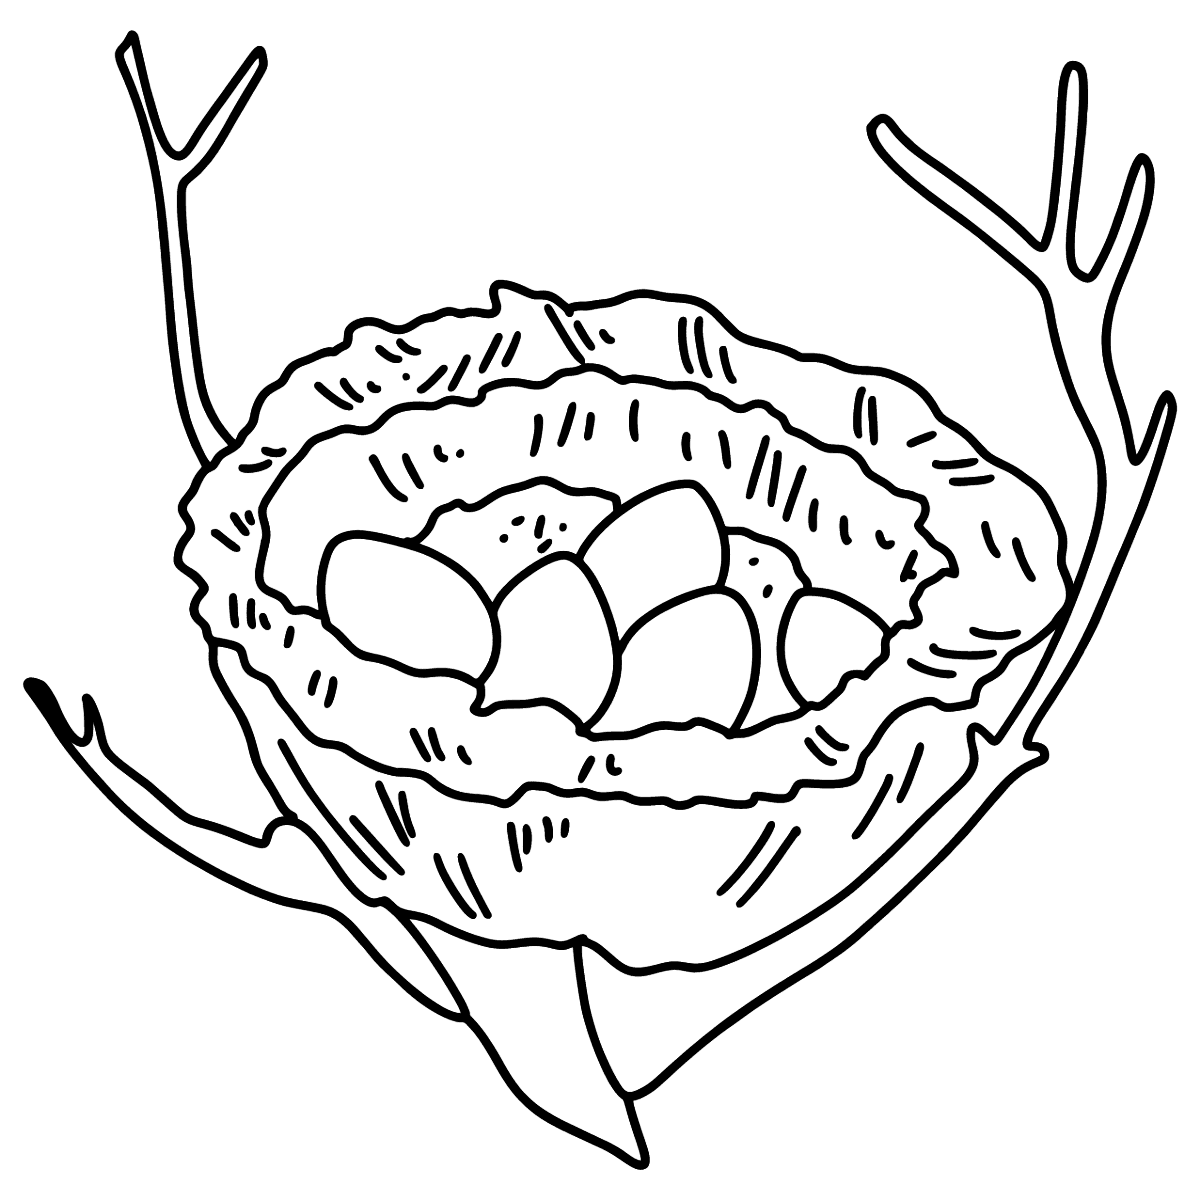 Bird's Nest coloring page ♥ Online or Printable for Free!